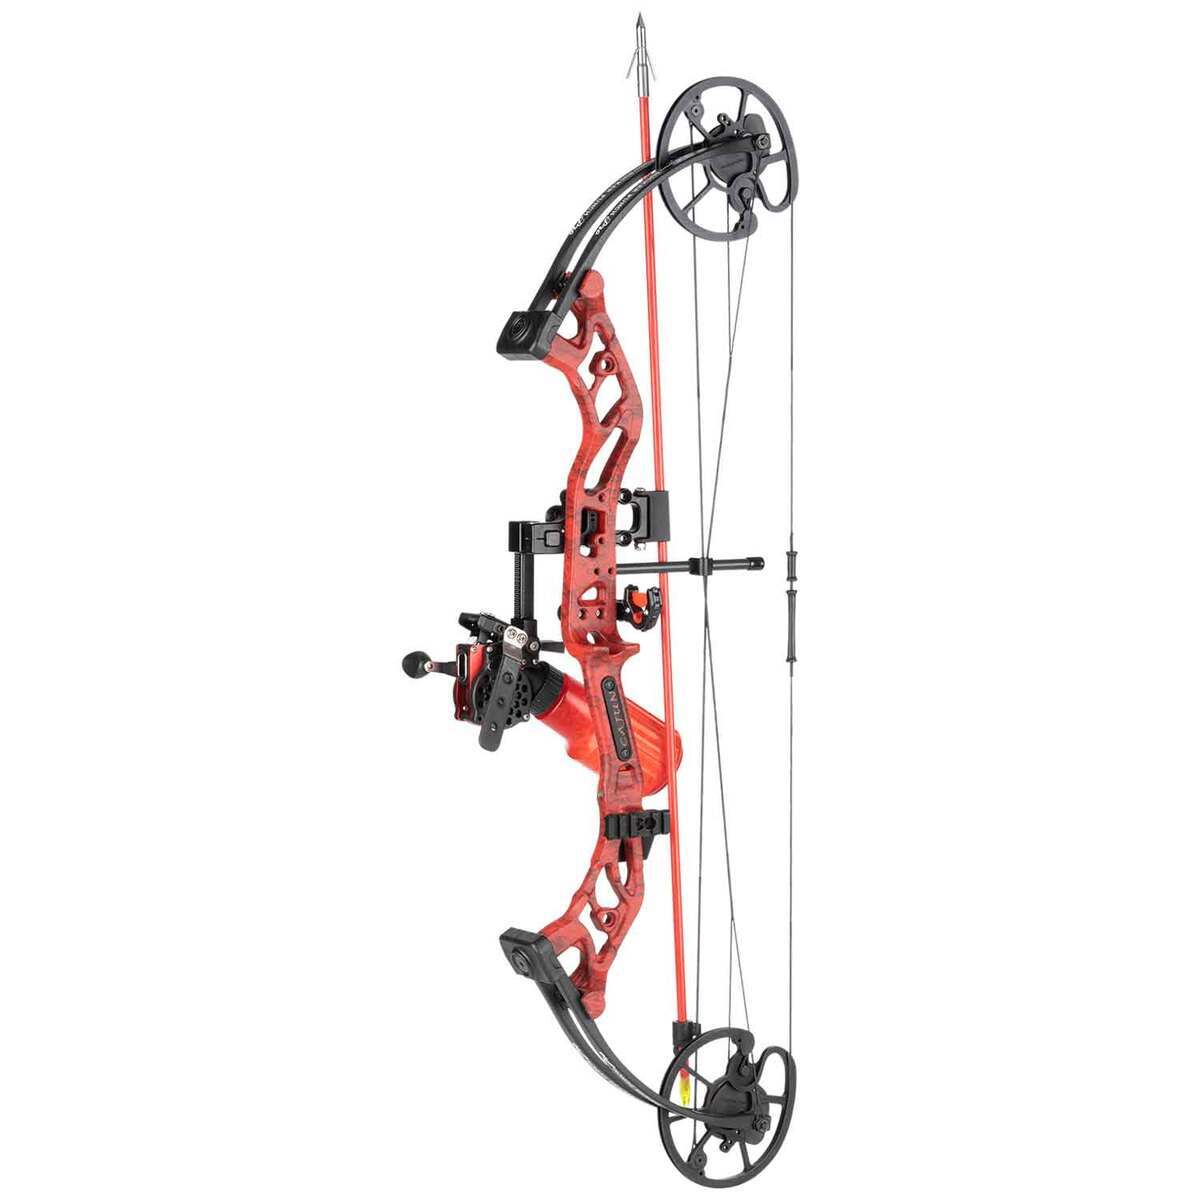 Bowfishing Bow Kit with Arrow Complete Compound Bow Fishing Kit